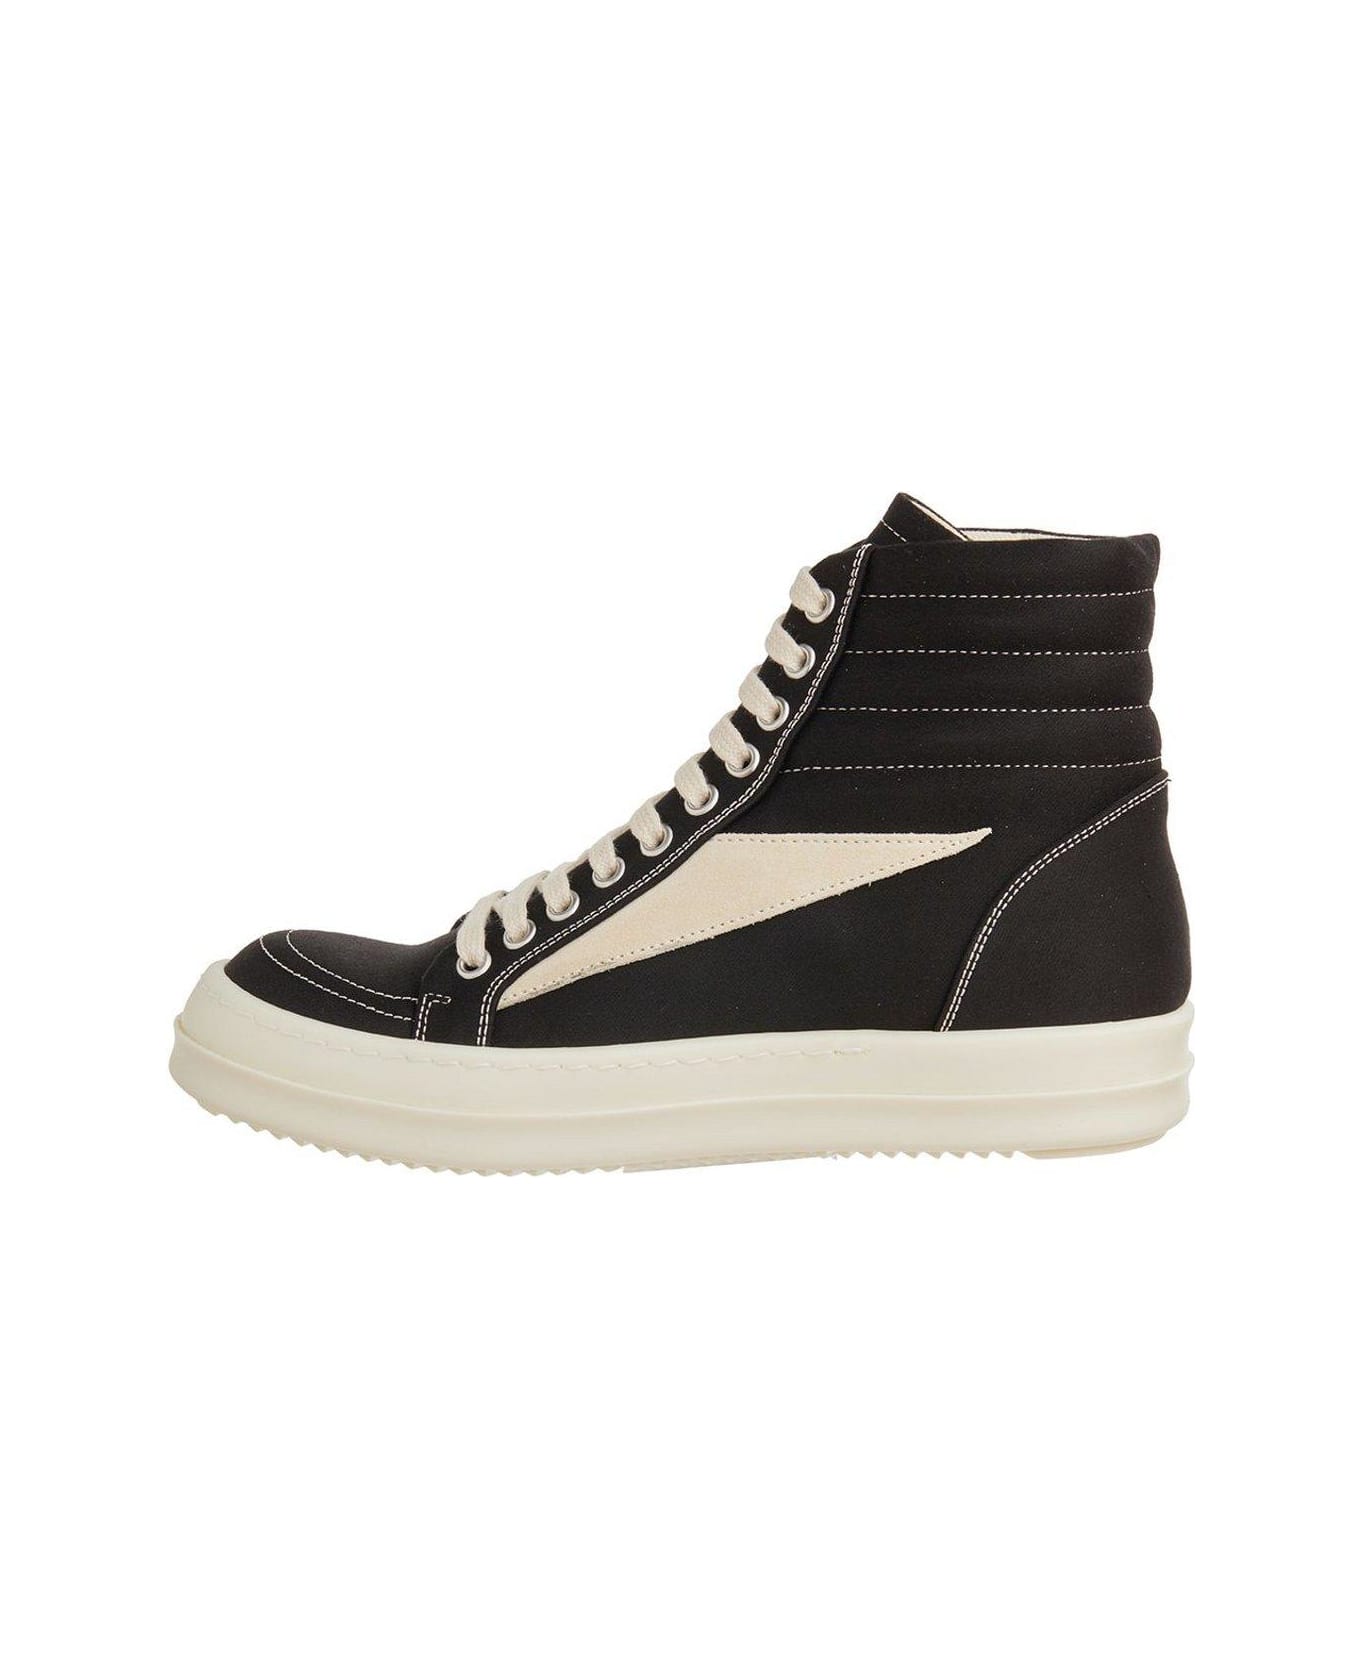 DRKSHDW High-top Lace-up Sneakers - Black